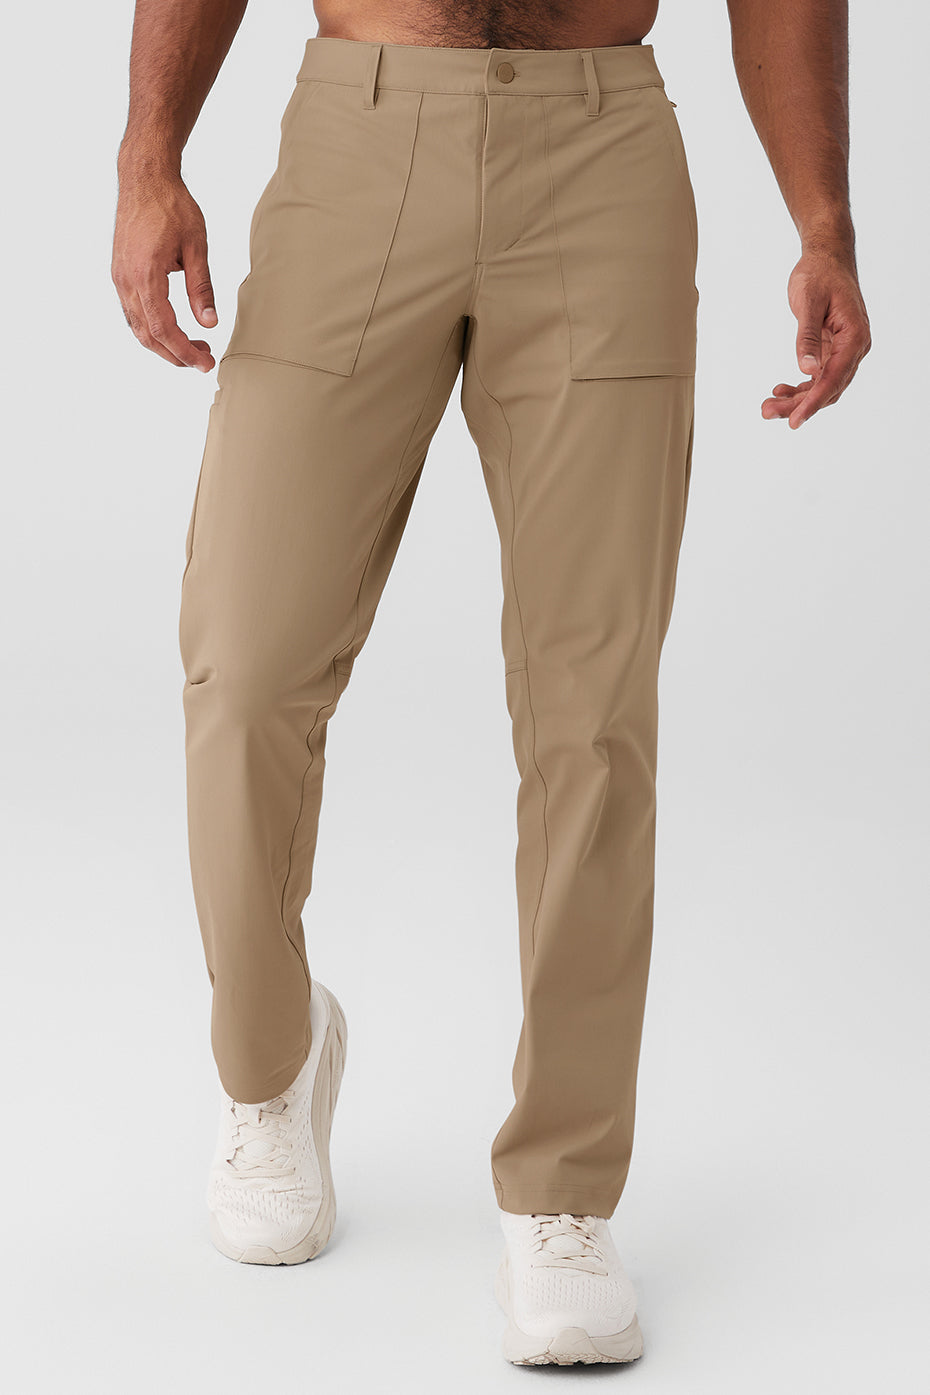 Beige Conquer Revitalize Lounge Pants by Alo on Sale